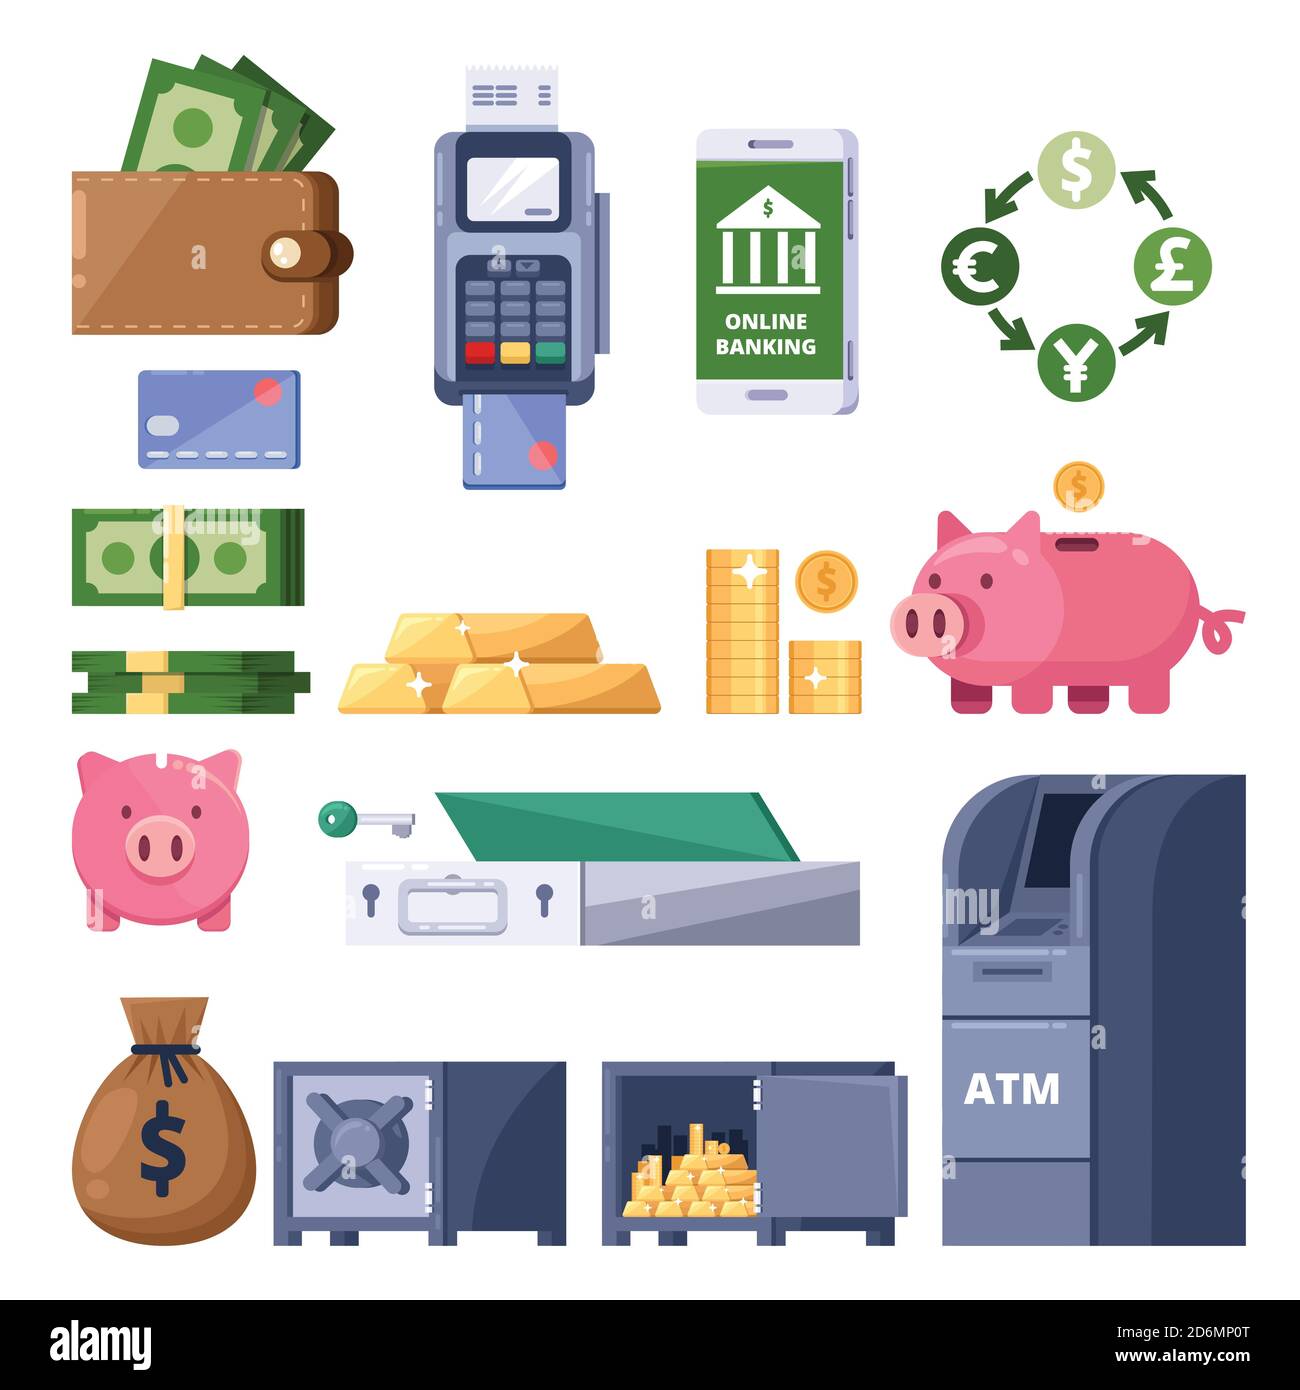 Money icons set. Isolated finance, banking, investment and commerce symbol. ATM, terminal, dollars, piggy bank and safe illustration Stock Vector